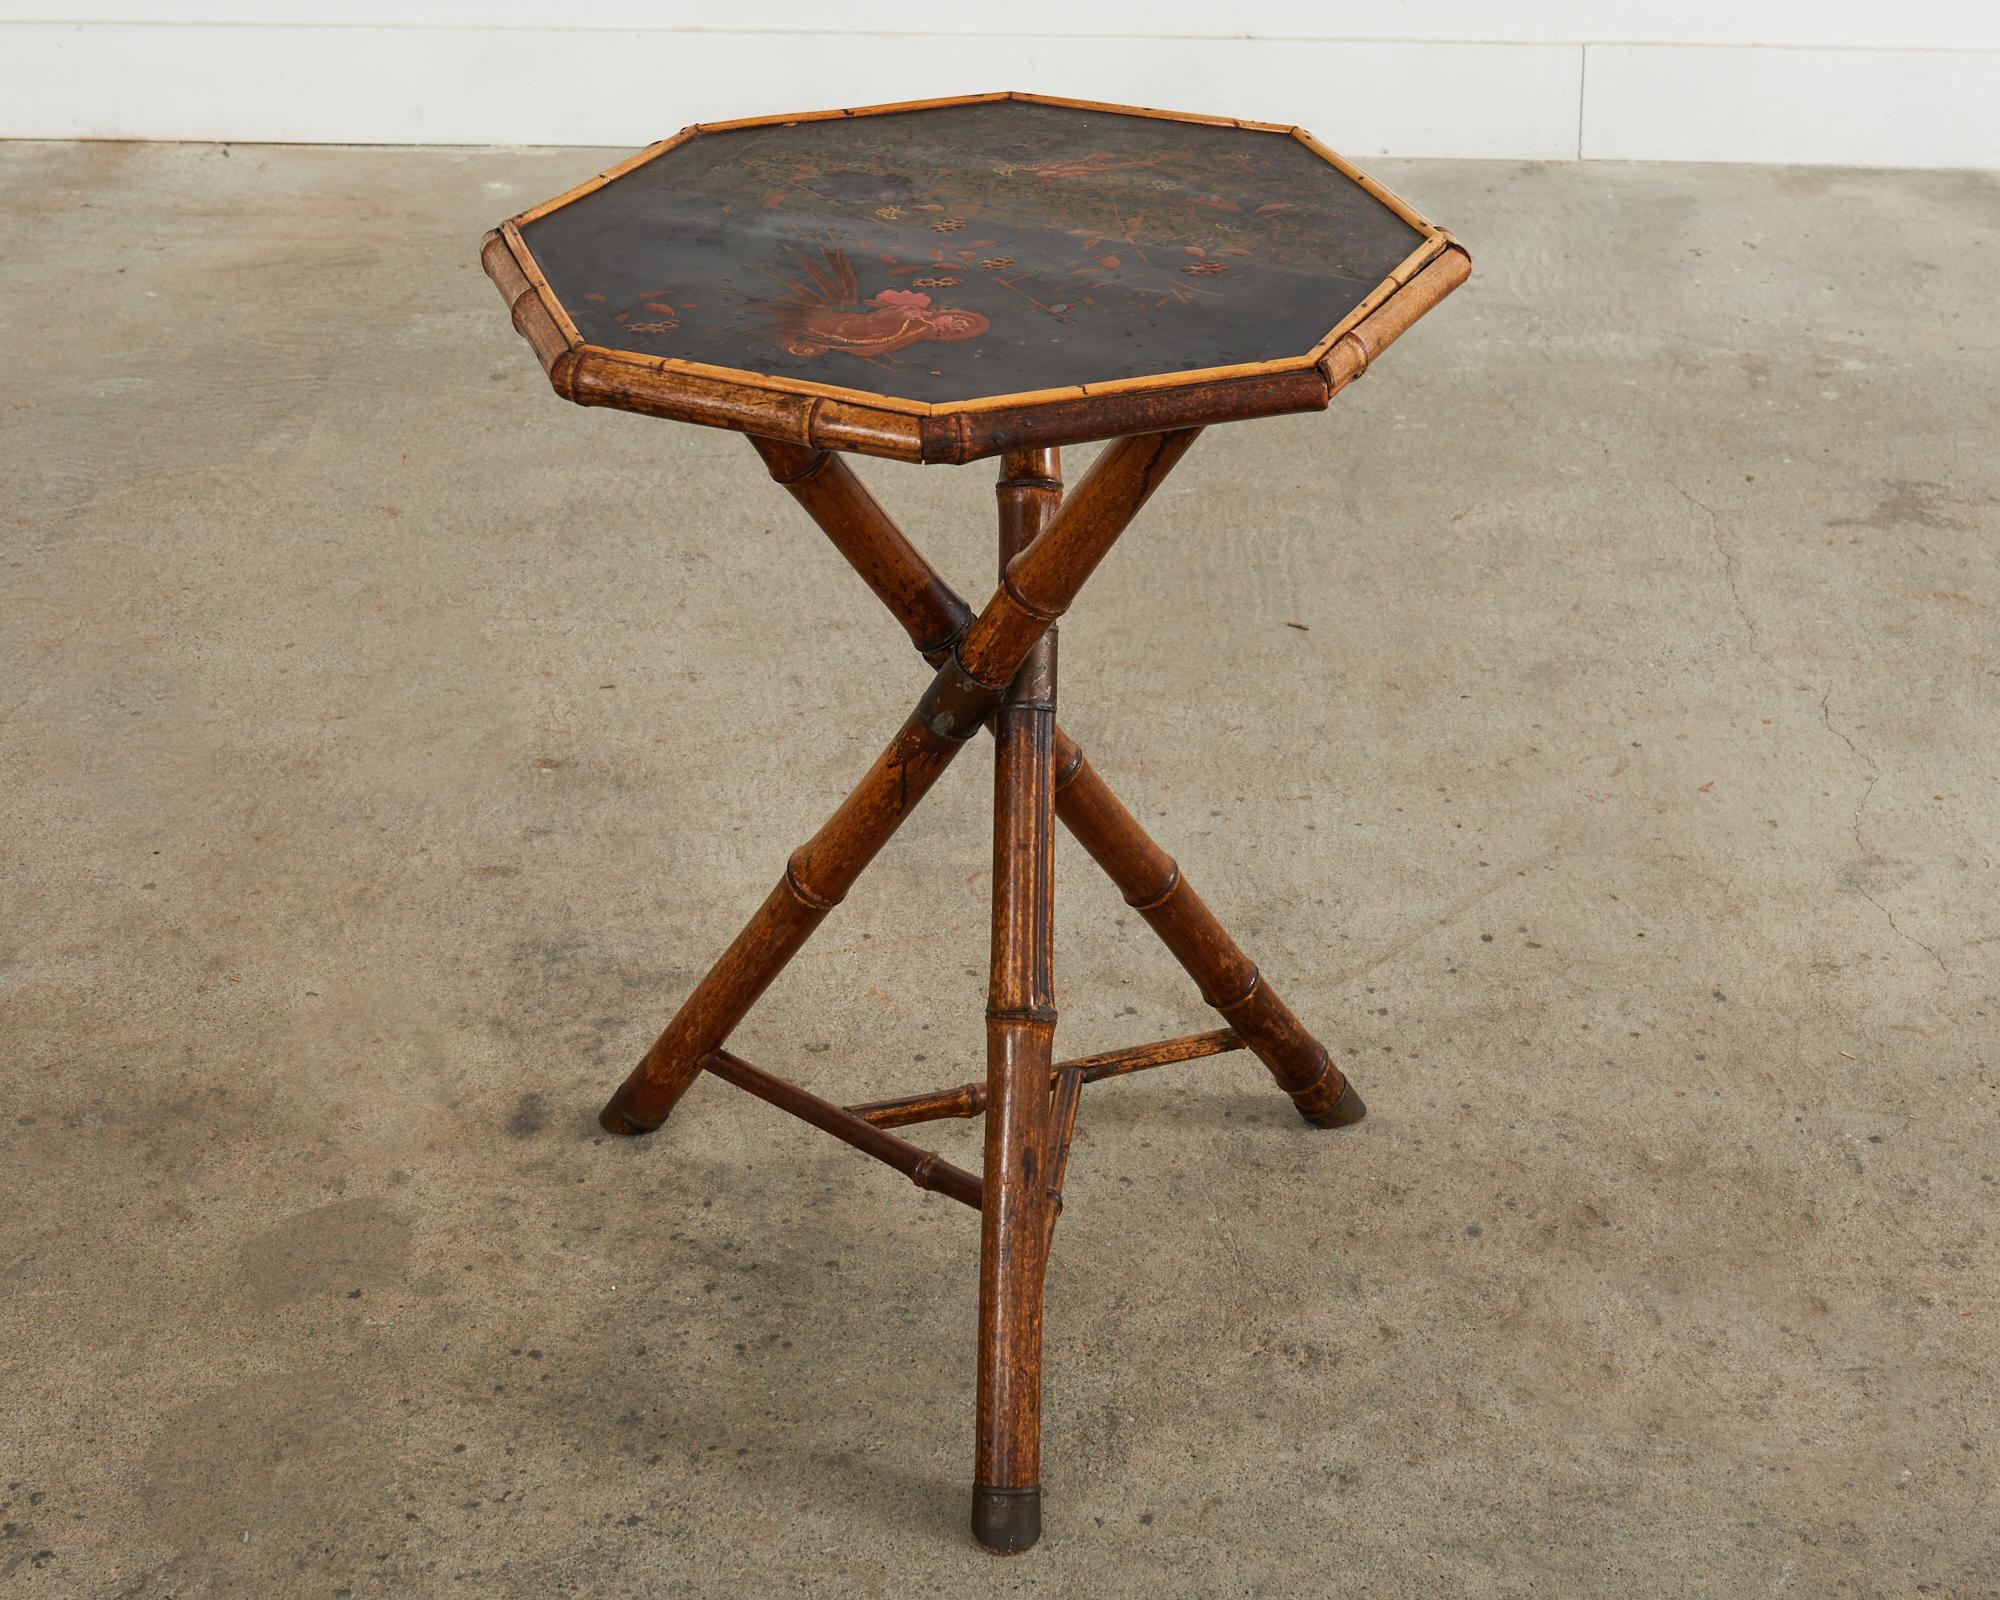 Aesthetic Movement 19th Century English Aesthetic Octagonal Bamboo Drinks Table